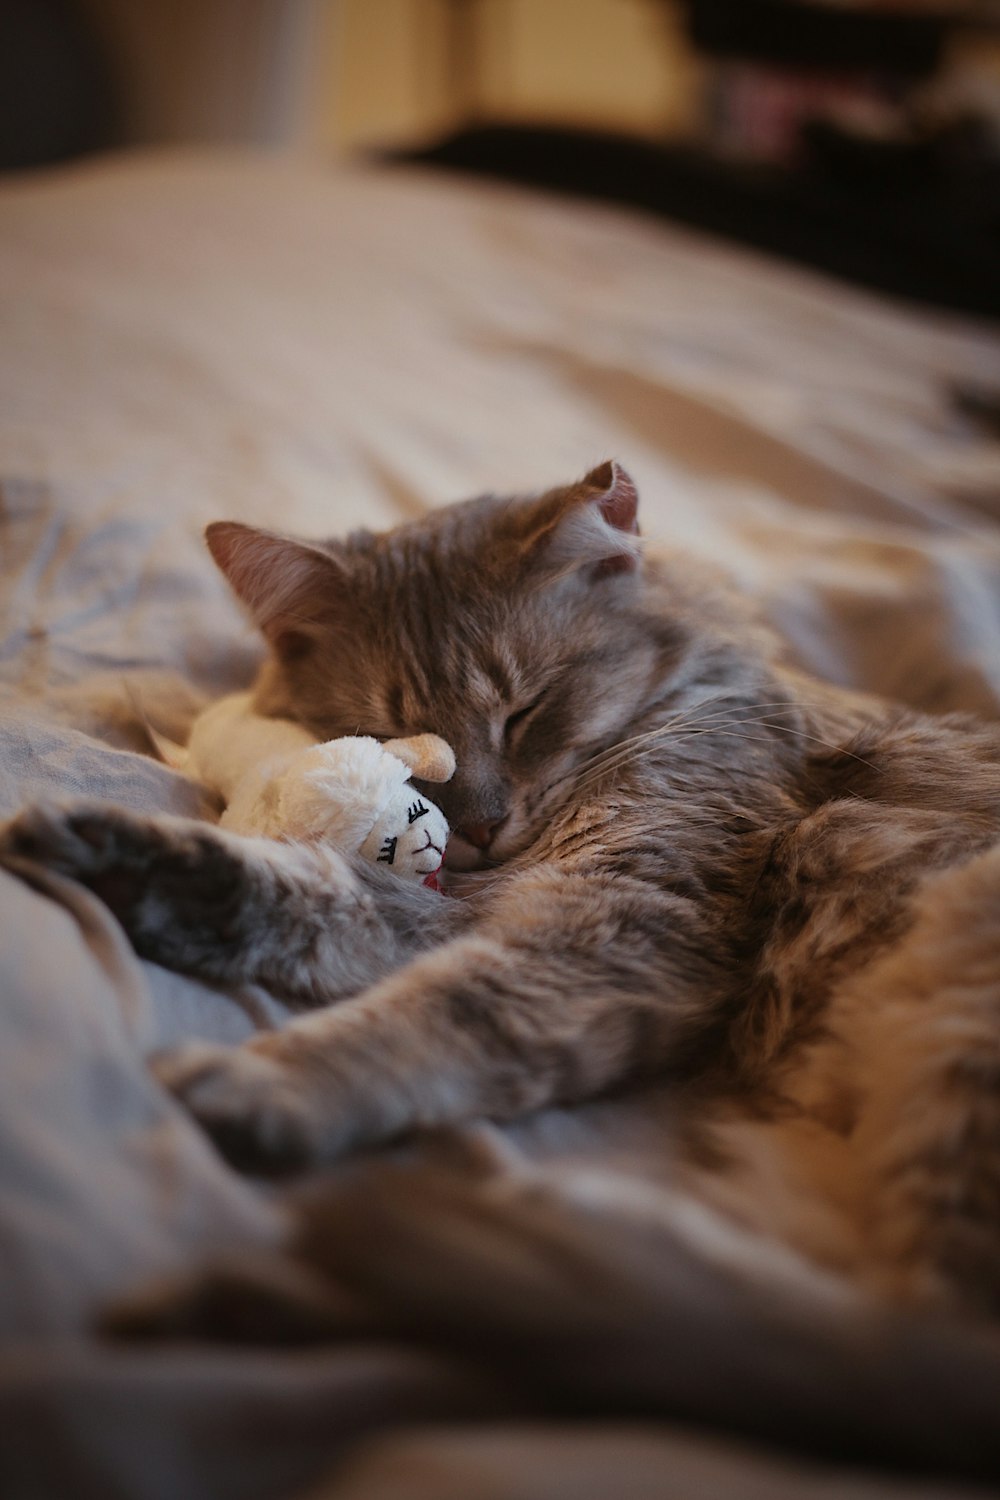 a cat sleeping on a bed with a stuffed animal